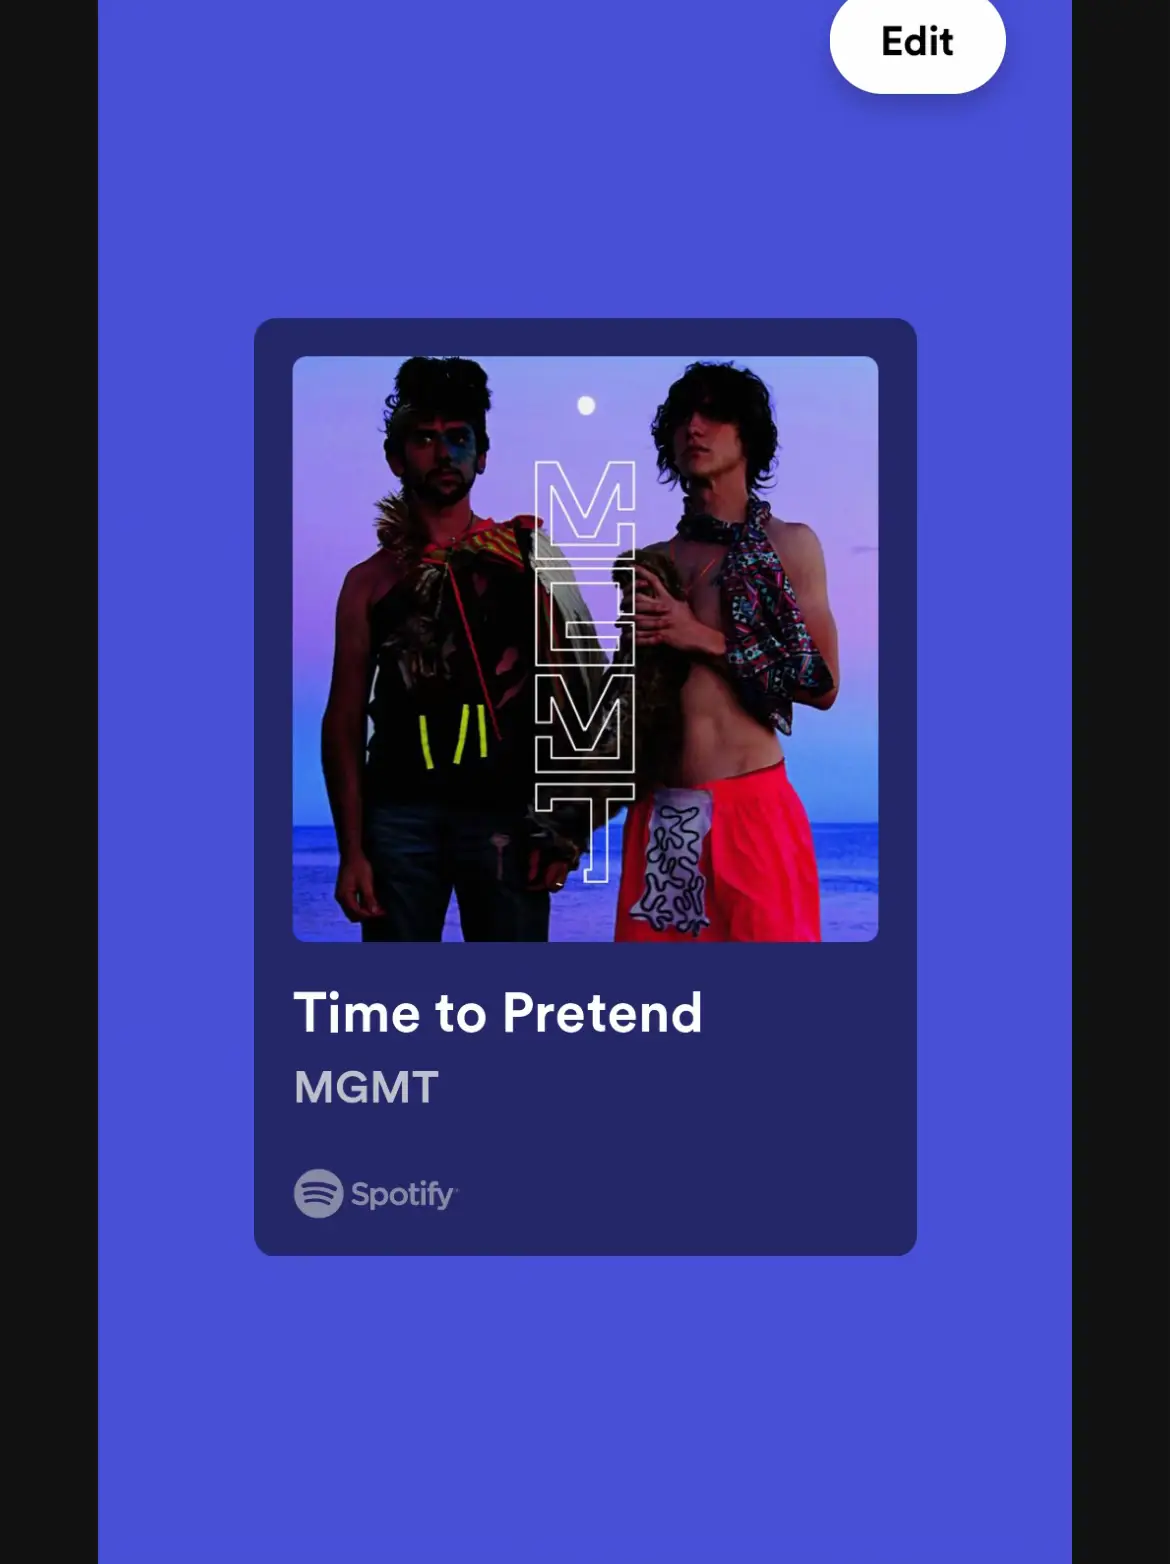  A Spotify ad for MGMT.